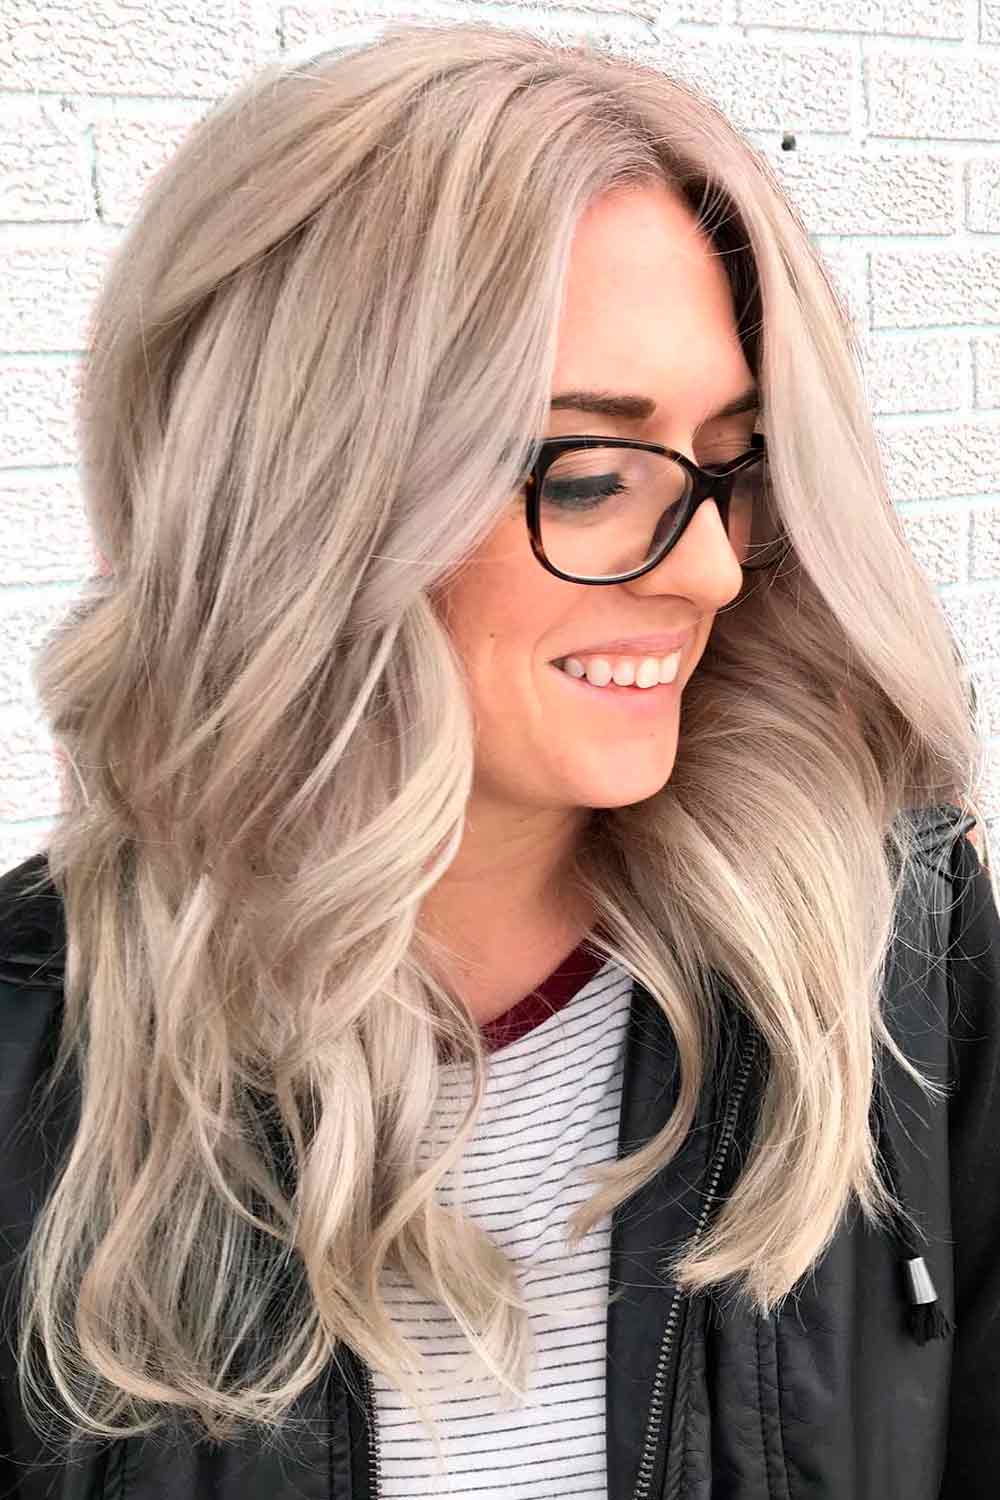 What Skin Tones Go With Ash Blonde?